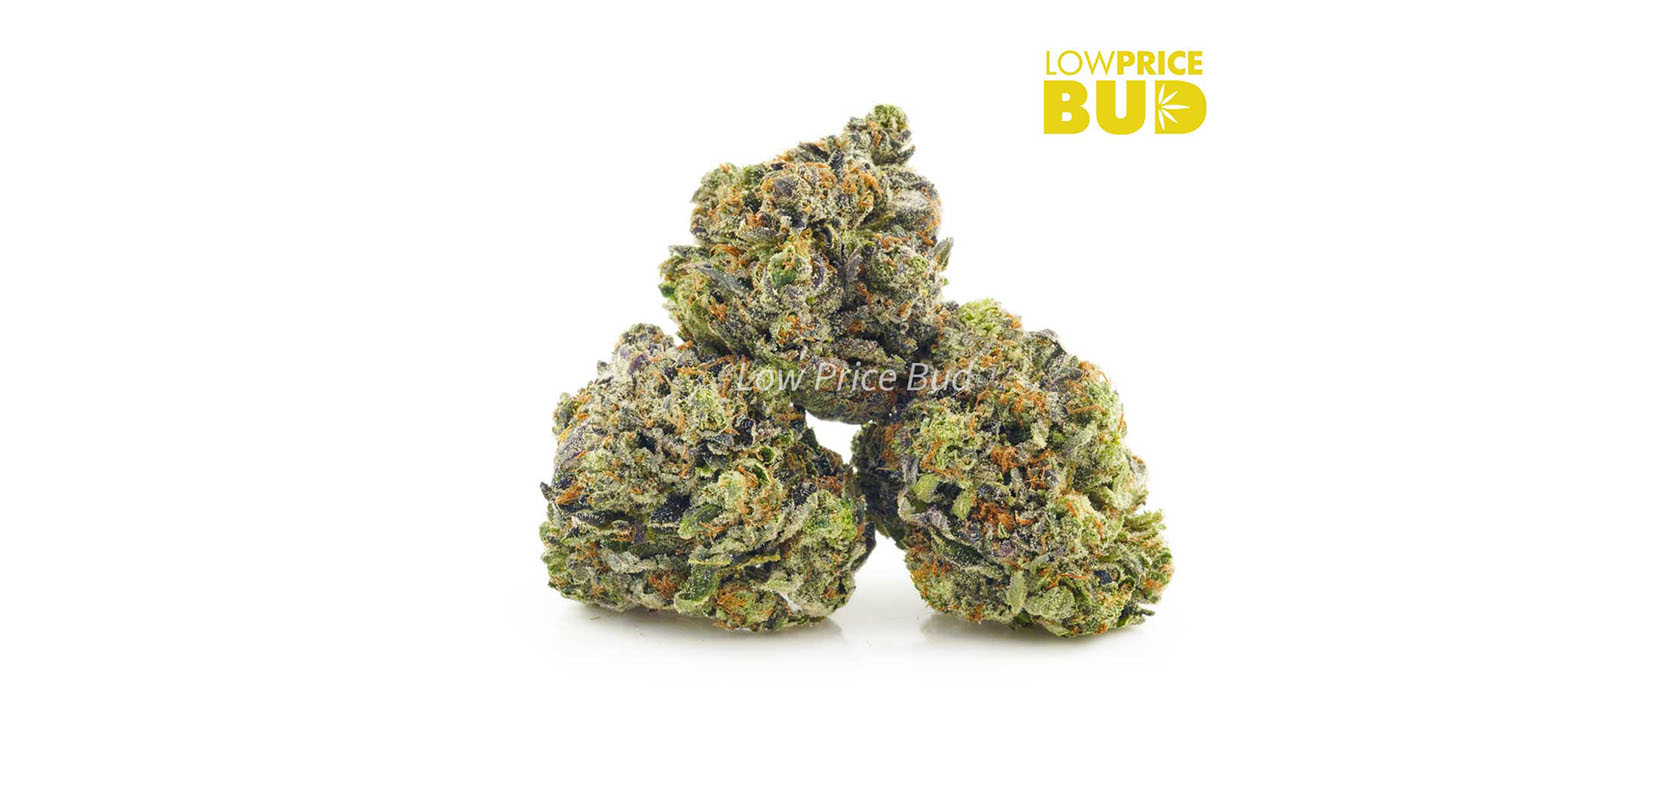 Best Indica strains for sleep include this Death Bubba strain AAAA weed from low price bud online dispensary in Canada. But weed online.